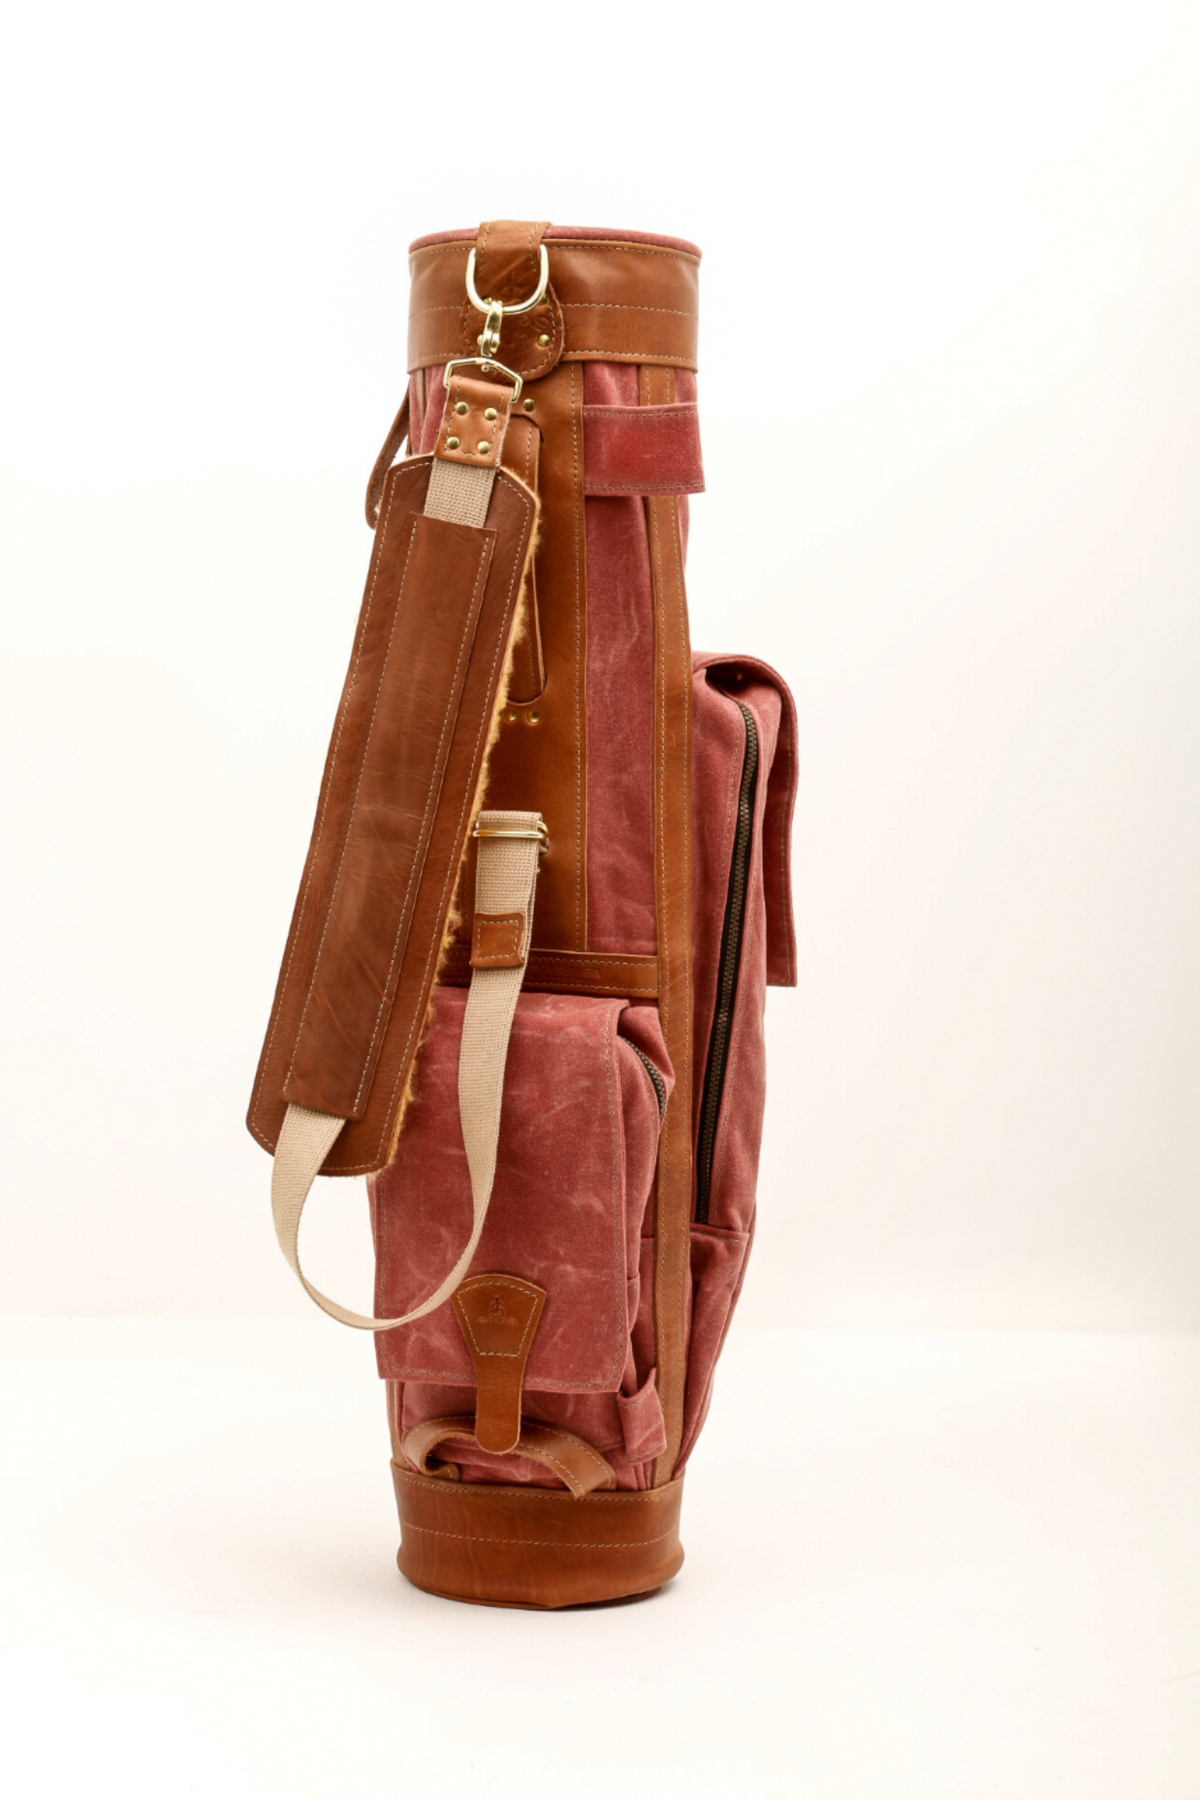 8" Airliner Tour Style Golf Bag - Nantucket Red Waxed Cotton Duck Canvas with Natural Leather - Steurer & Jacoby